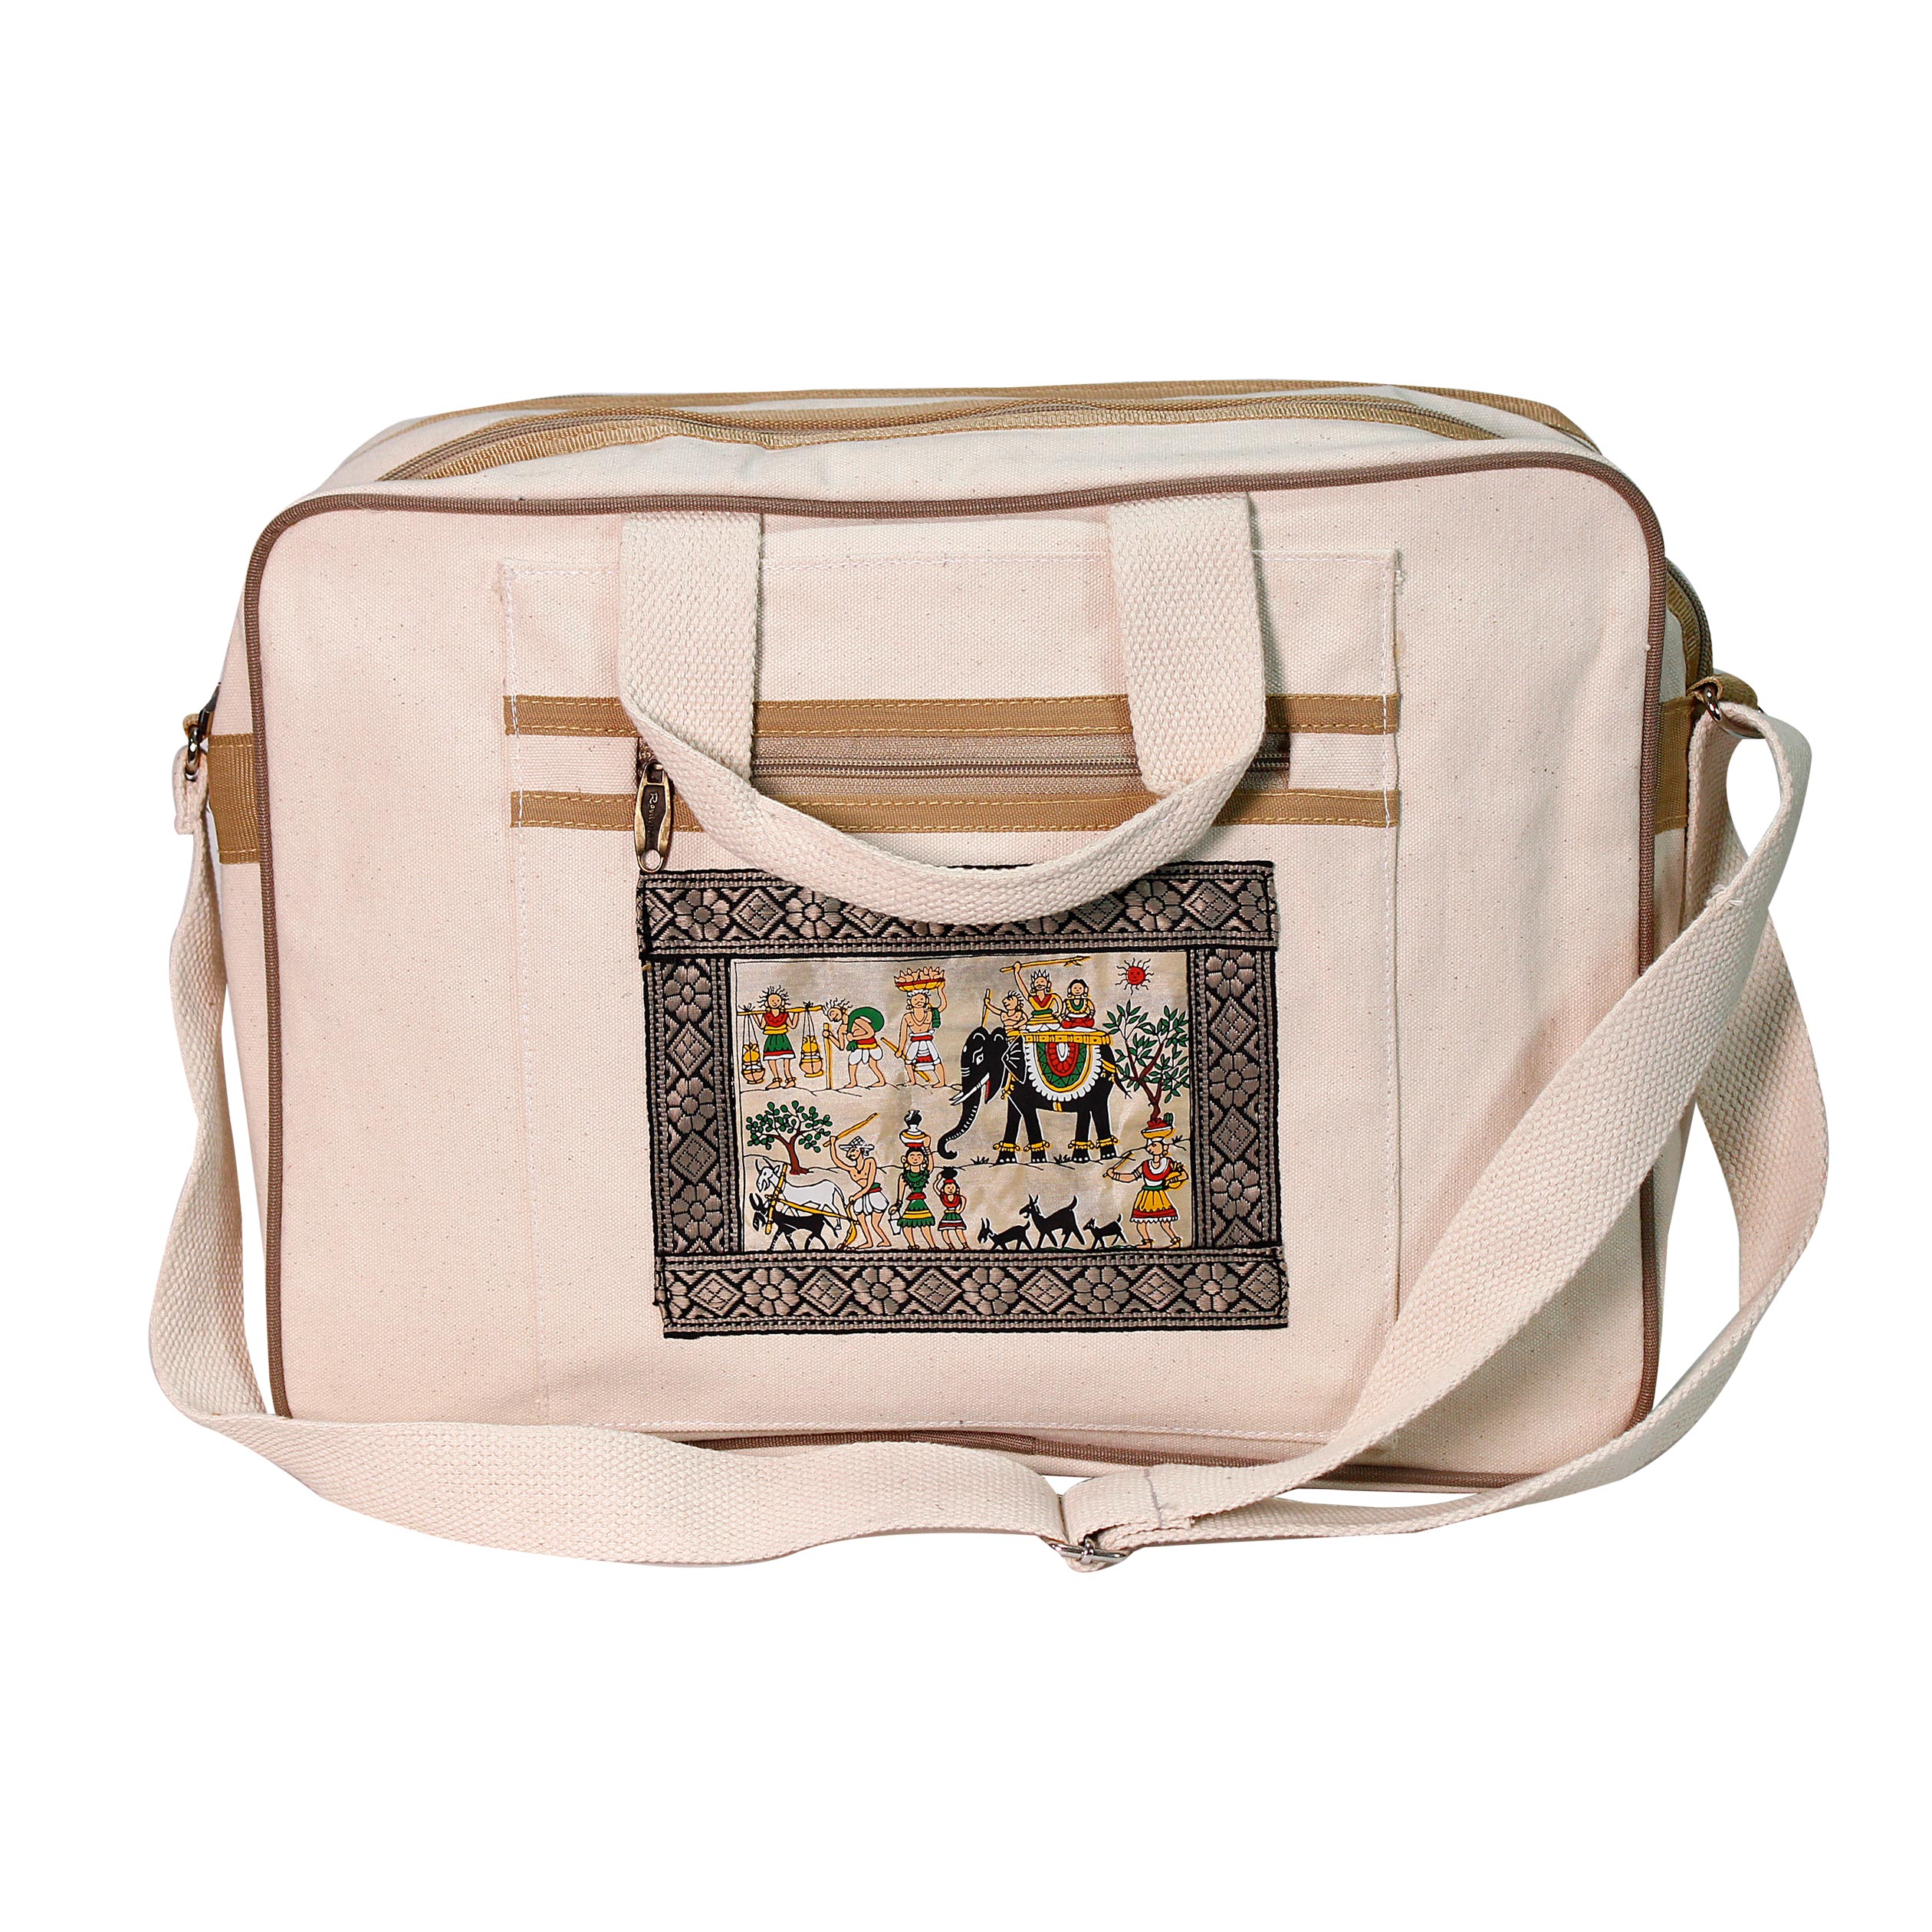 Odisha Handcrafted White & Brown Pattachitra Design Laptop Bag